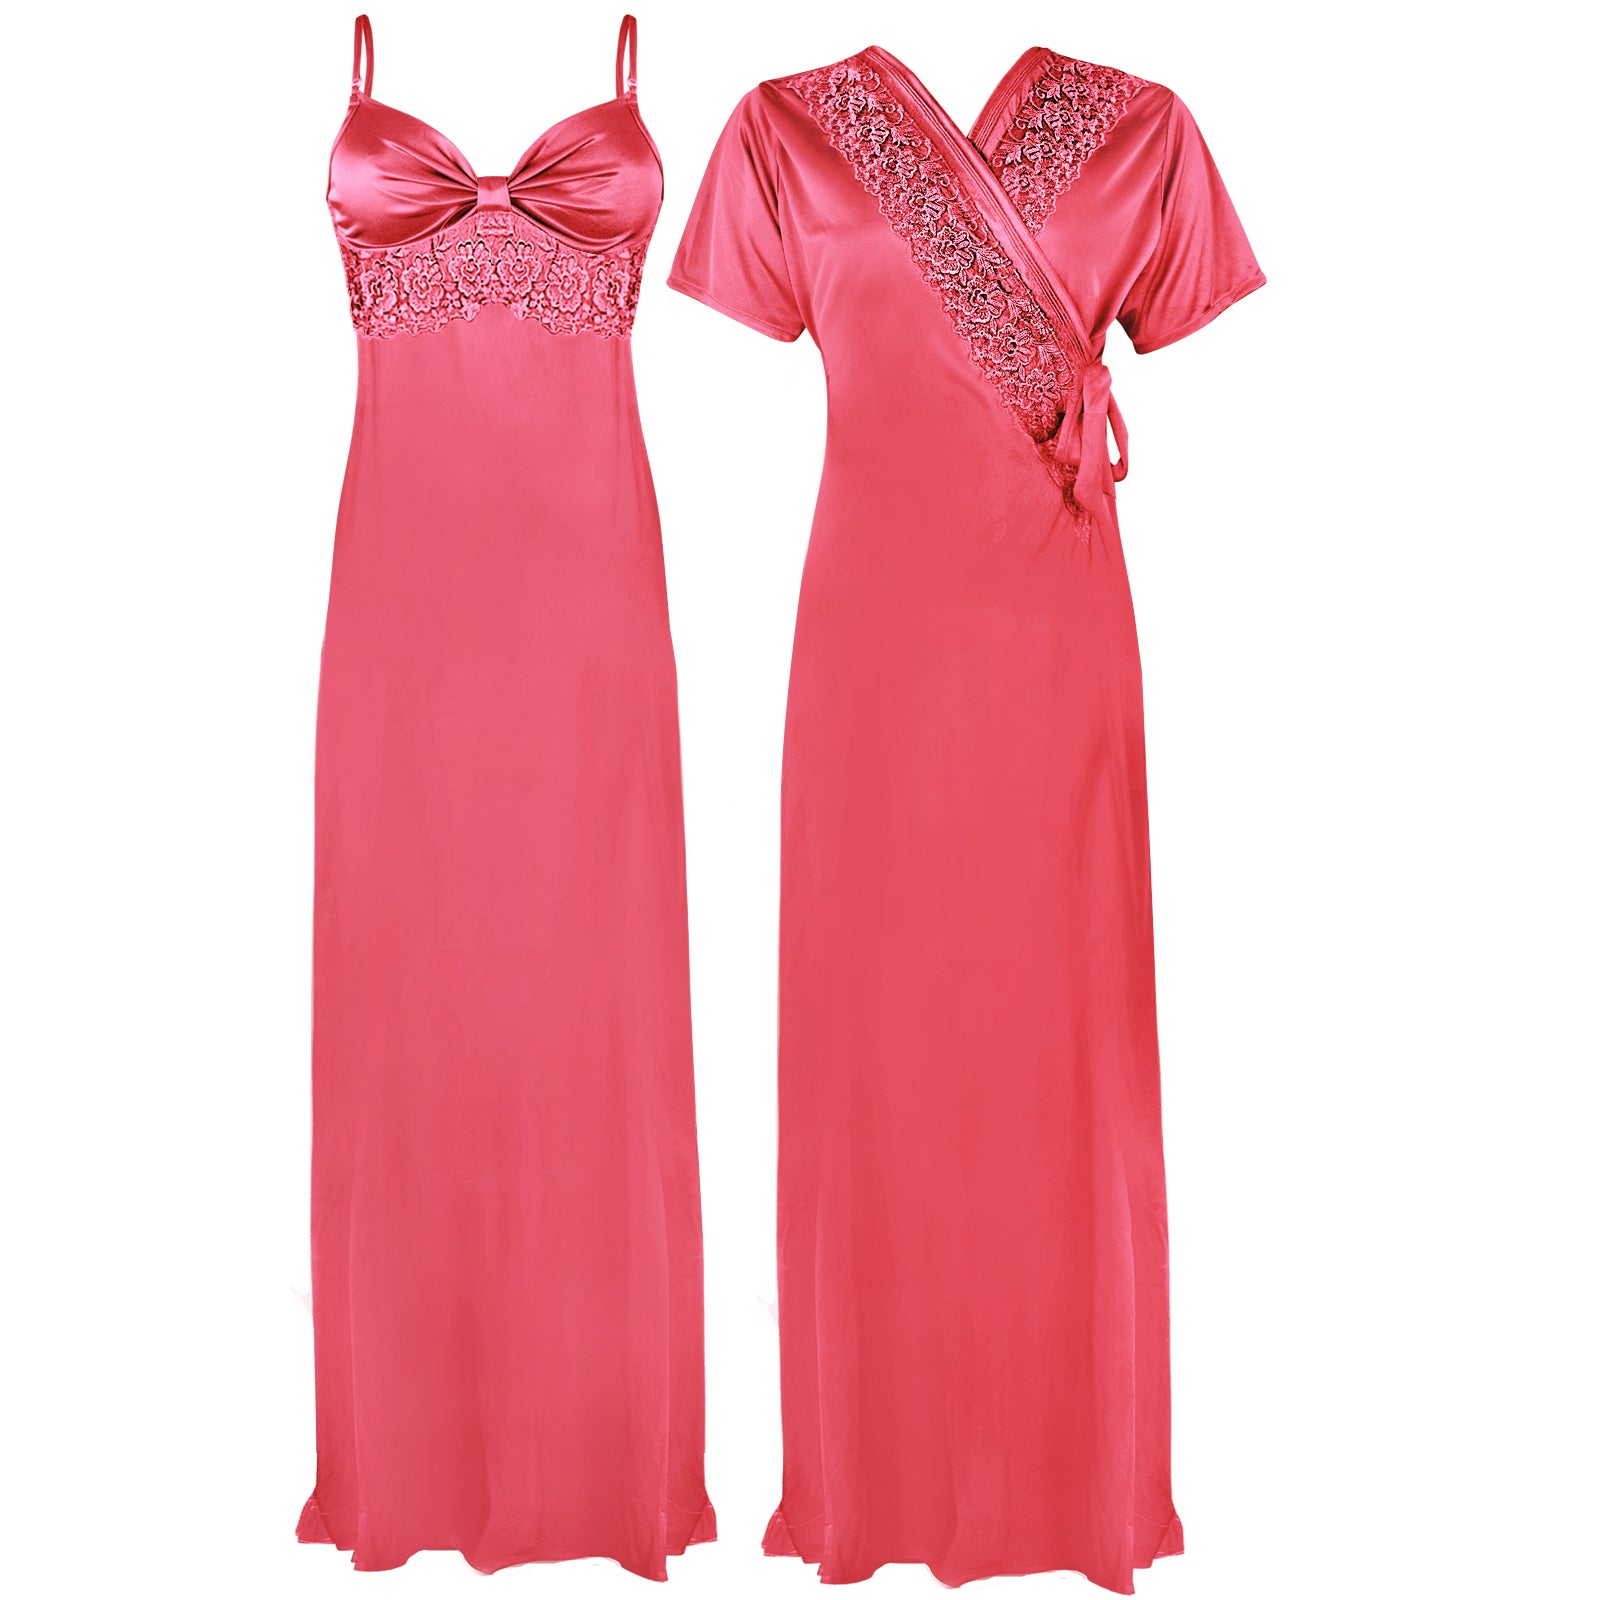 Coral Pink / One Size The Orange Tags Women Satin LACE Long Nightdress Ladies Nighty Chemise Embroidery Detailed The Orange Tags